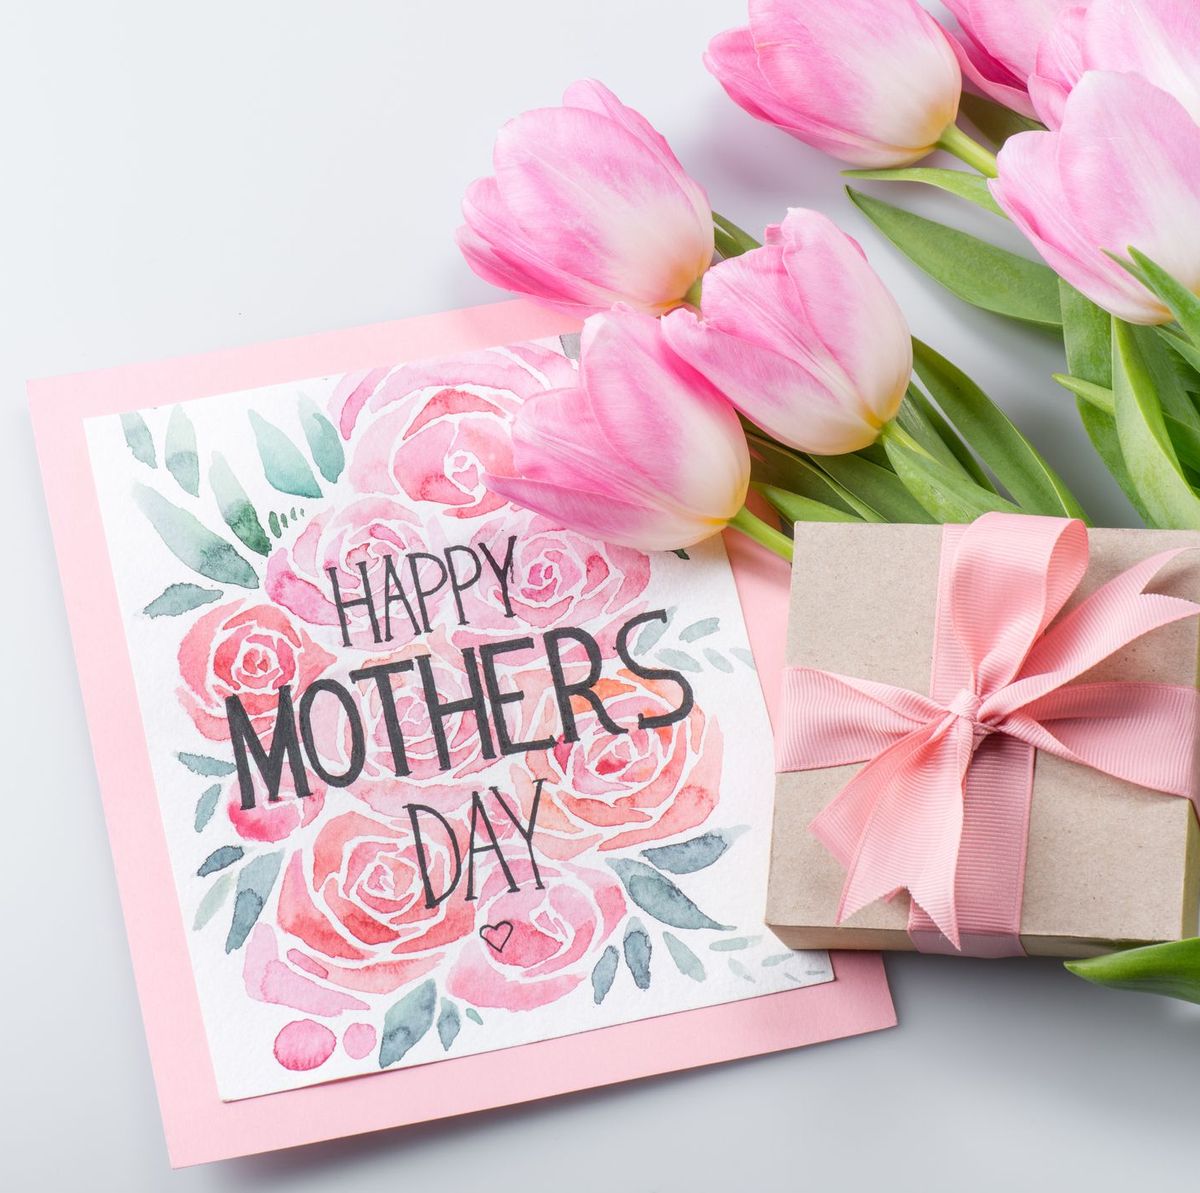 https://hips.hearstapps.com/hmg-prod/images/what-to-write-in-a-mothers-day-card-1584543780.jpg?crop=0.671xw:1.00xh;0.171xw,0&resize=1200:*